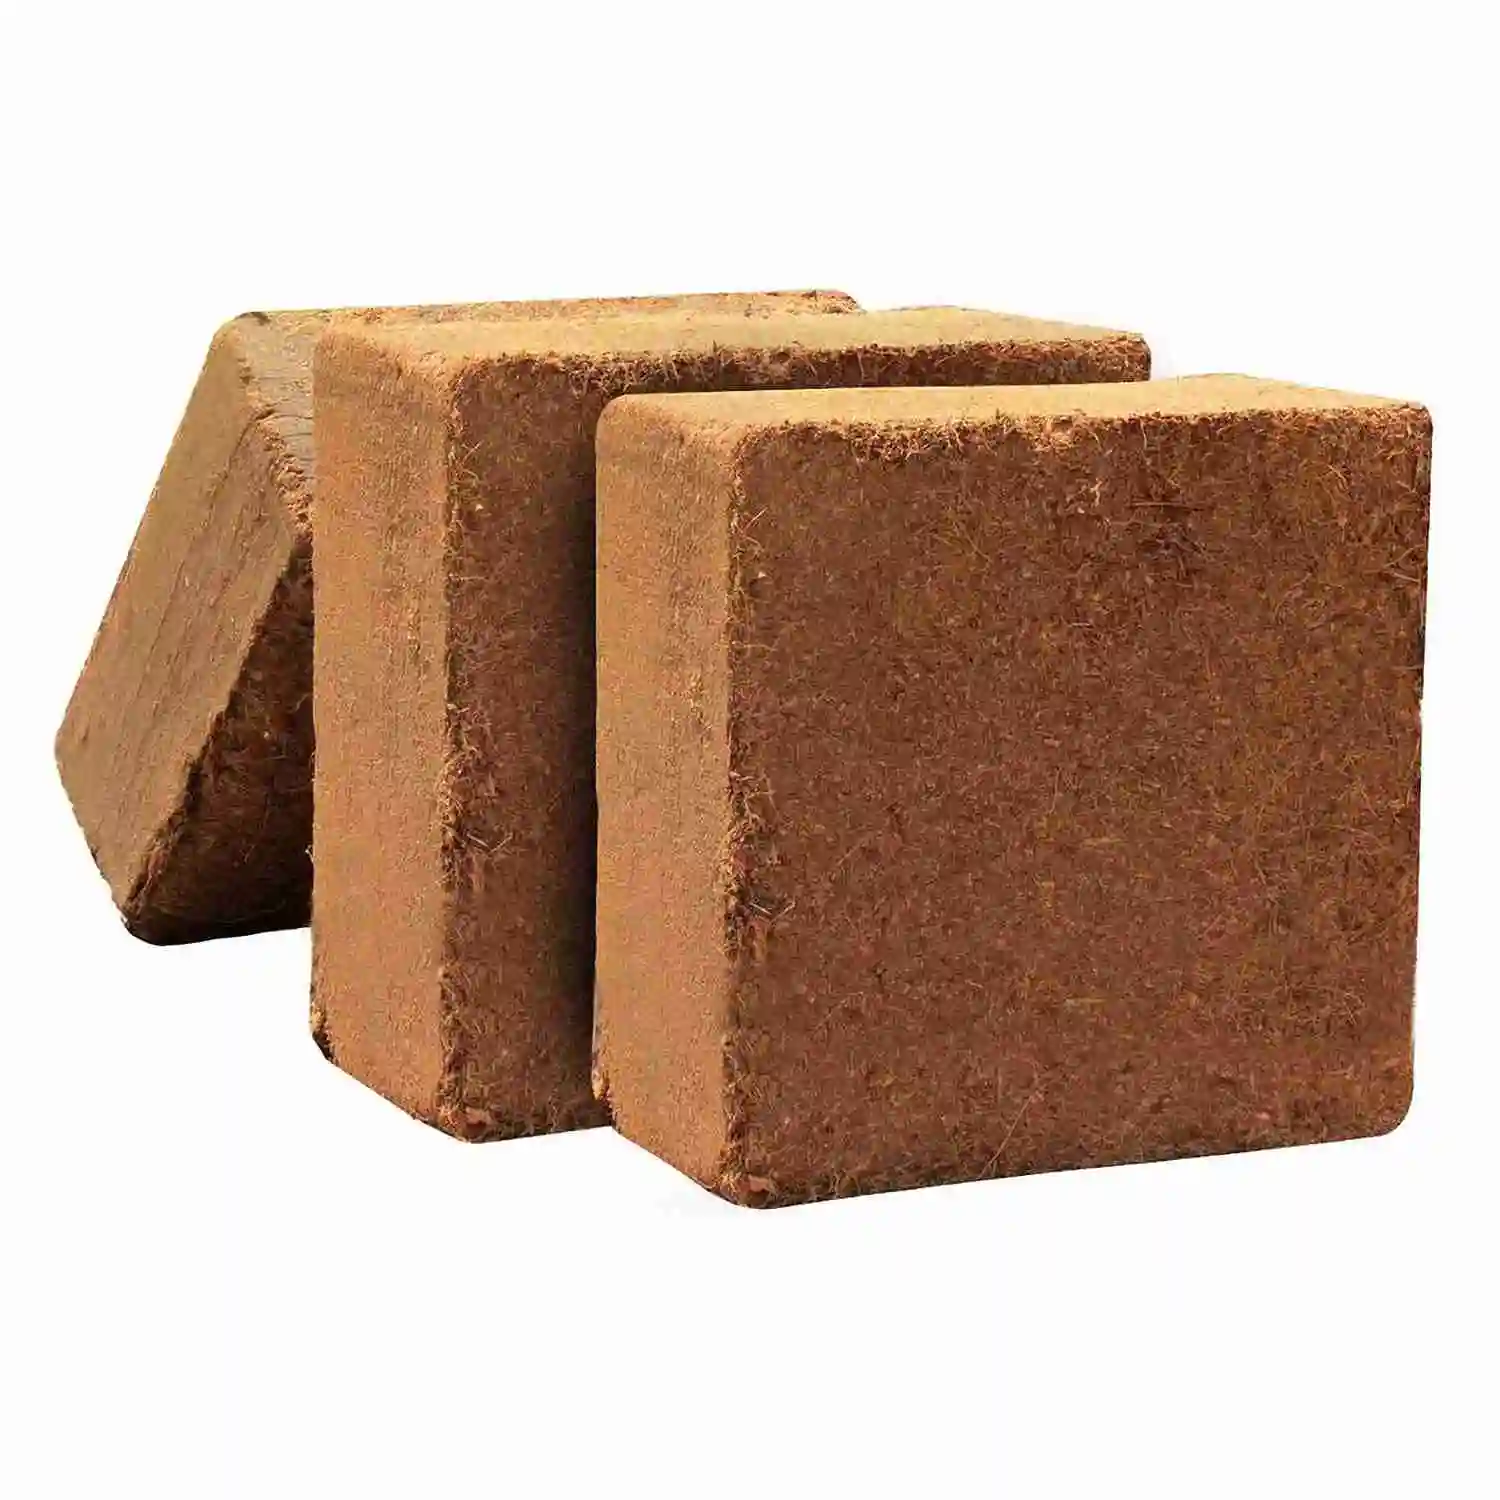 For farms, terraced garden coco peat block 5kg with low ec is used from direct suppliers India and with best price as of bulk.